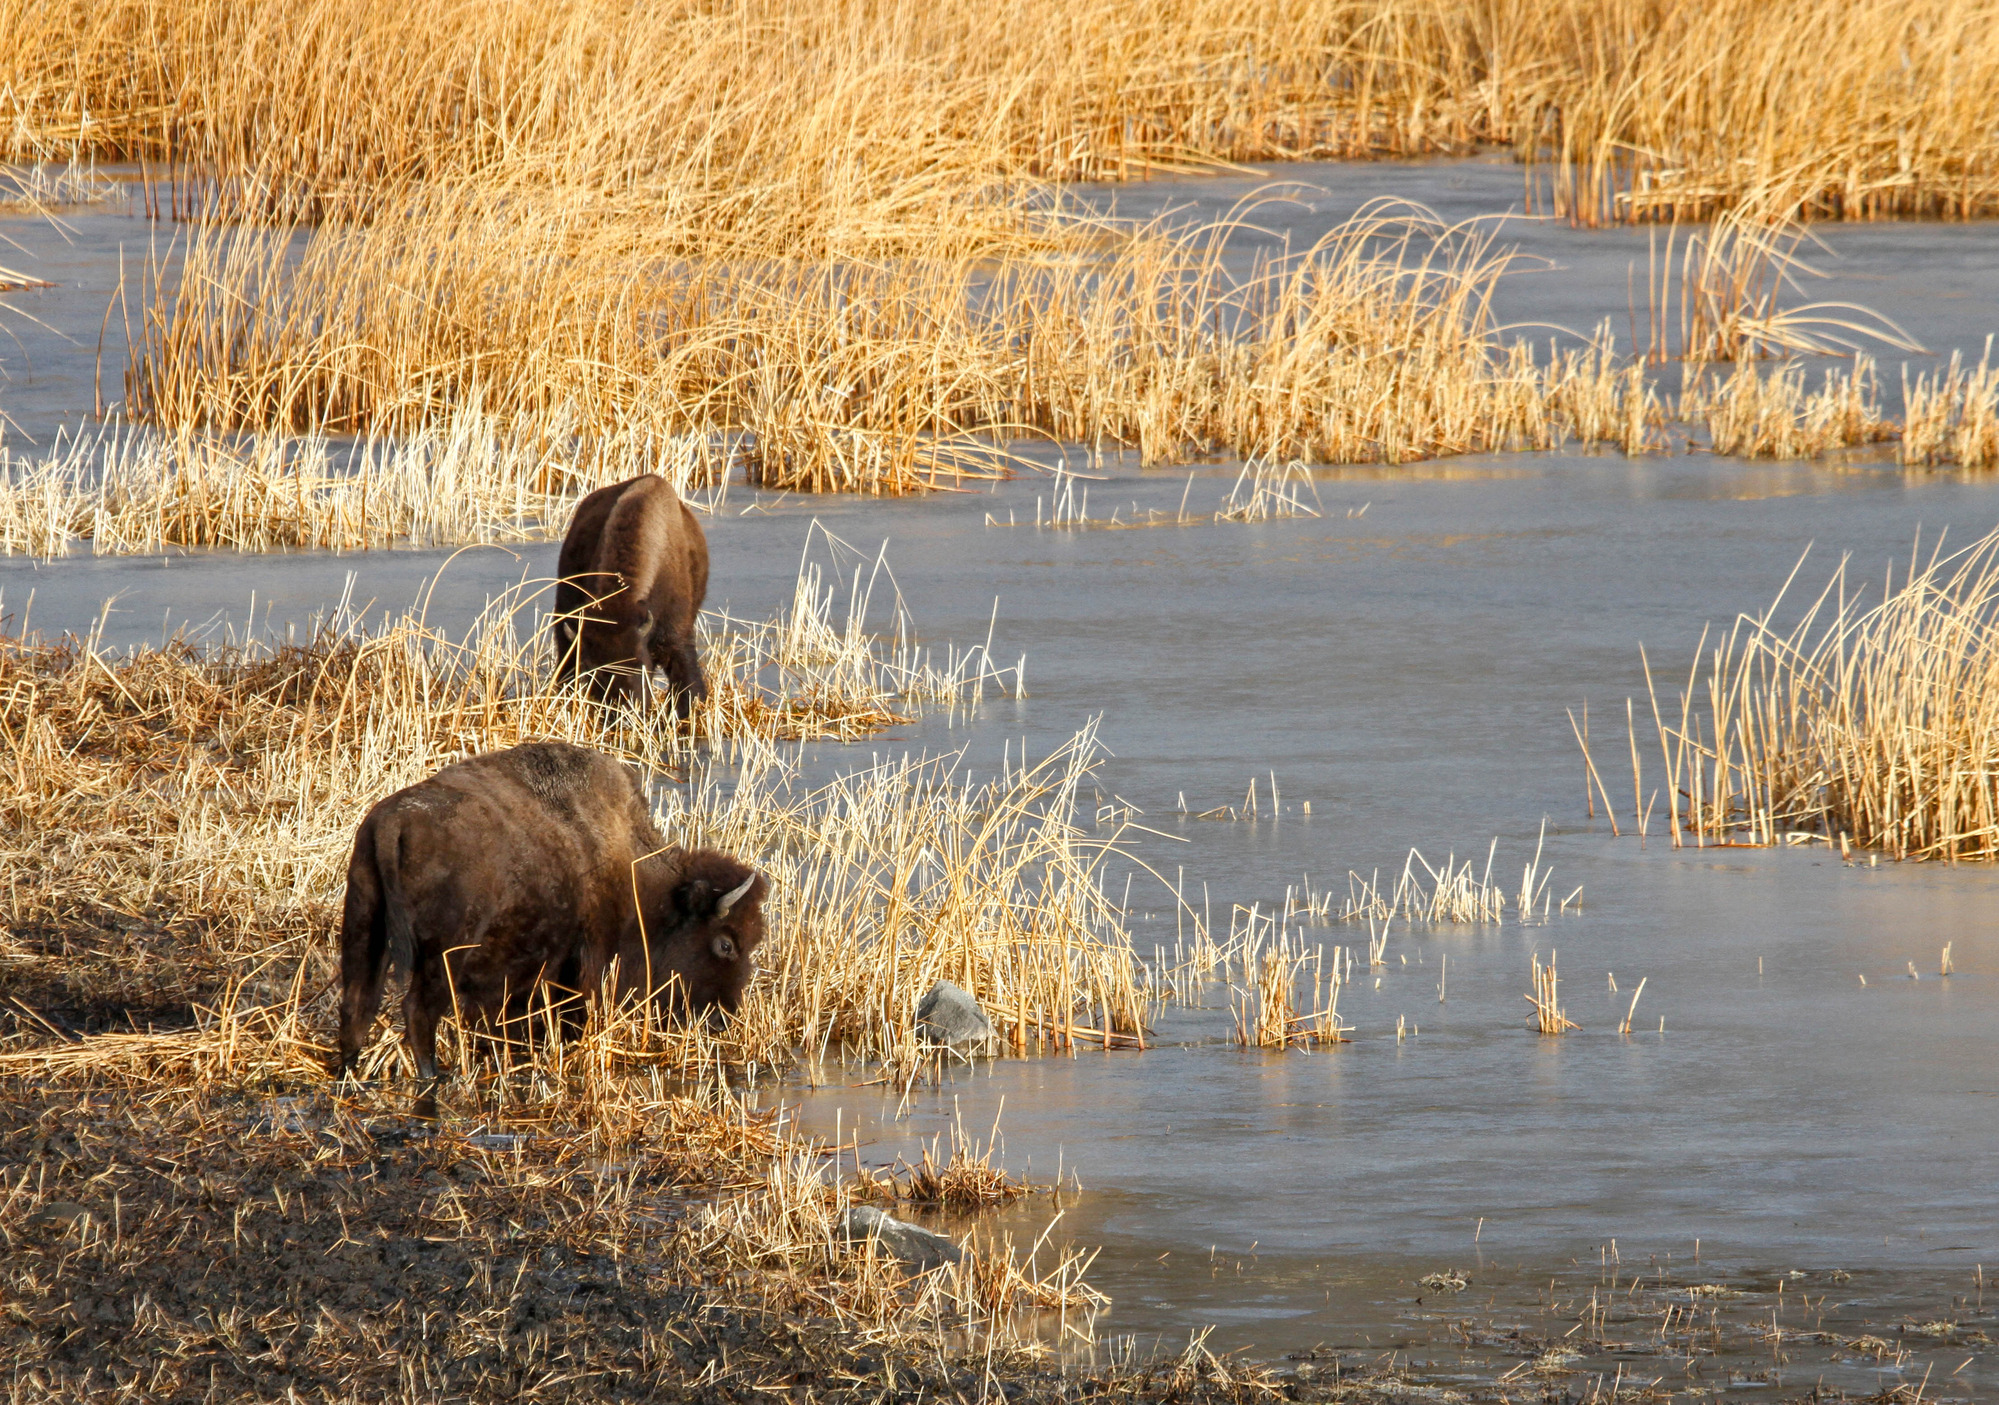 Bison are grazing on dried grass in a wet bog.